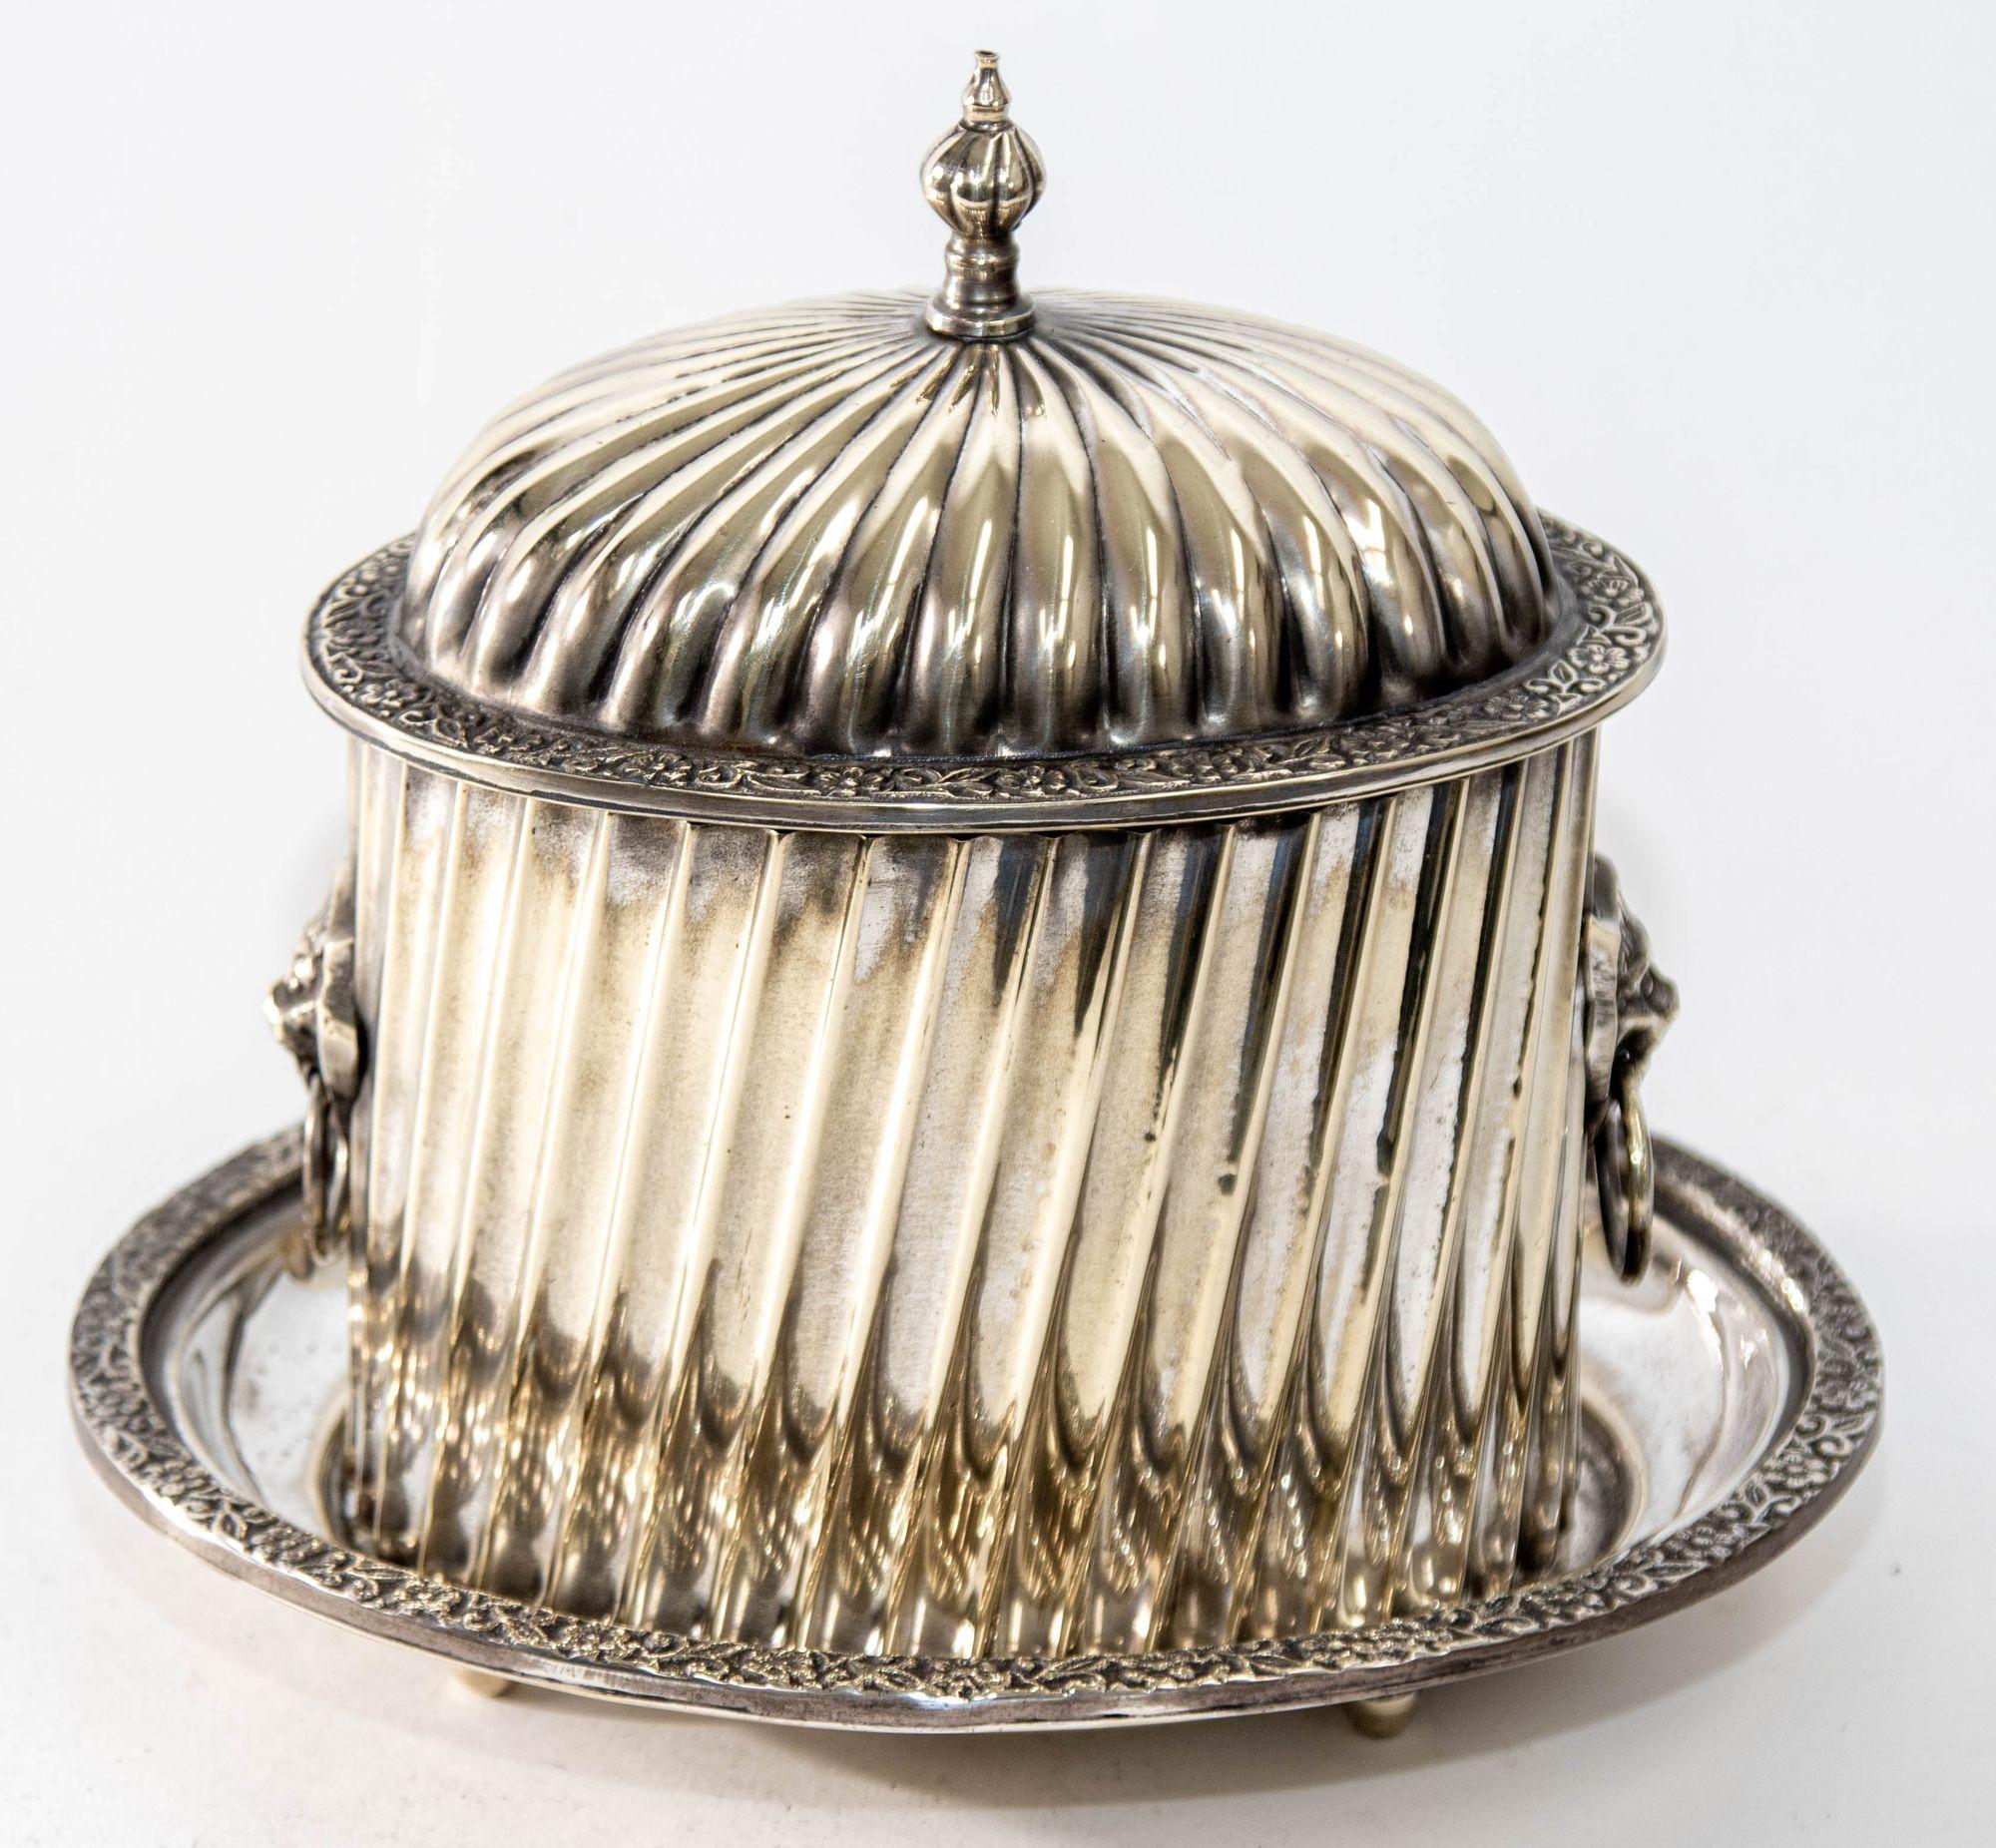 1950s English Sheffield silver plate covered biscuit box, tea caddy with lion head handle.
Beautiful English silver plate covered biscuit box, tea caddy with footed gallery tray and exterior design details.
Elegant Reticulated brass silver plated